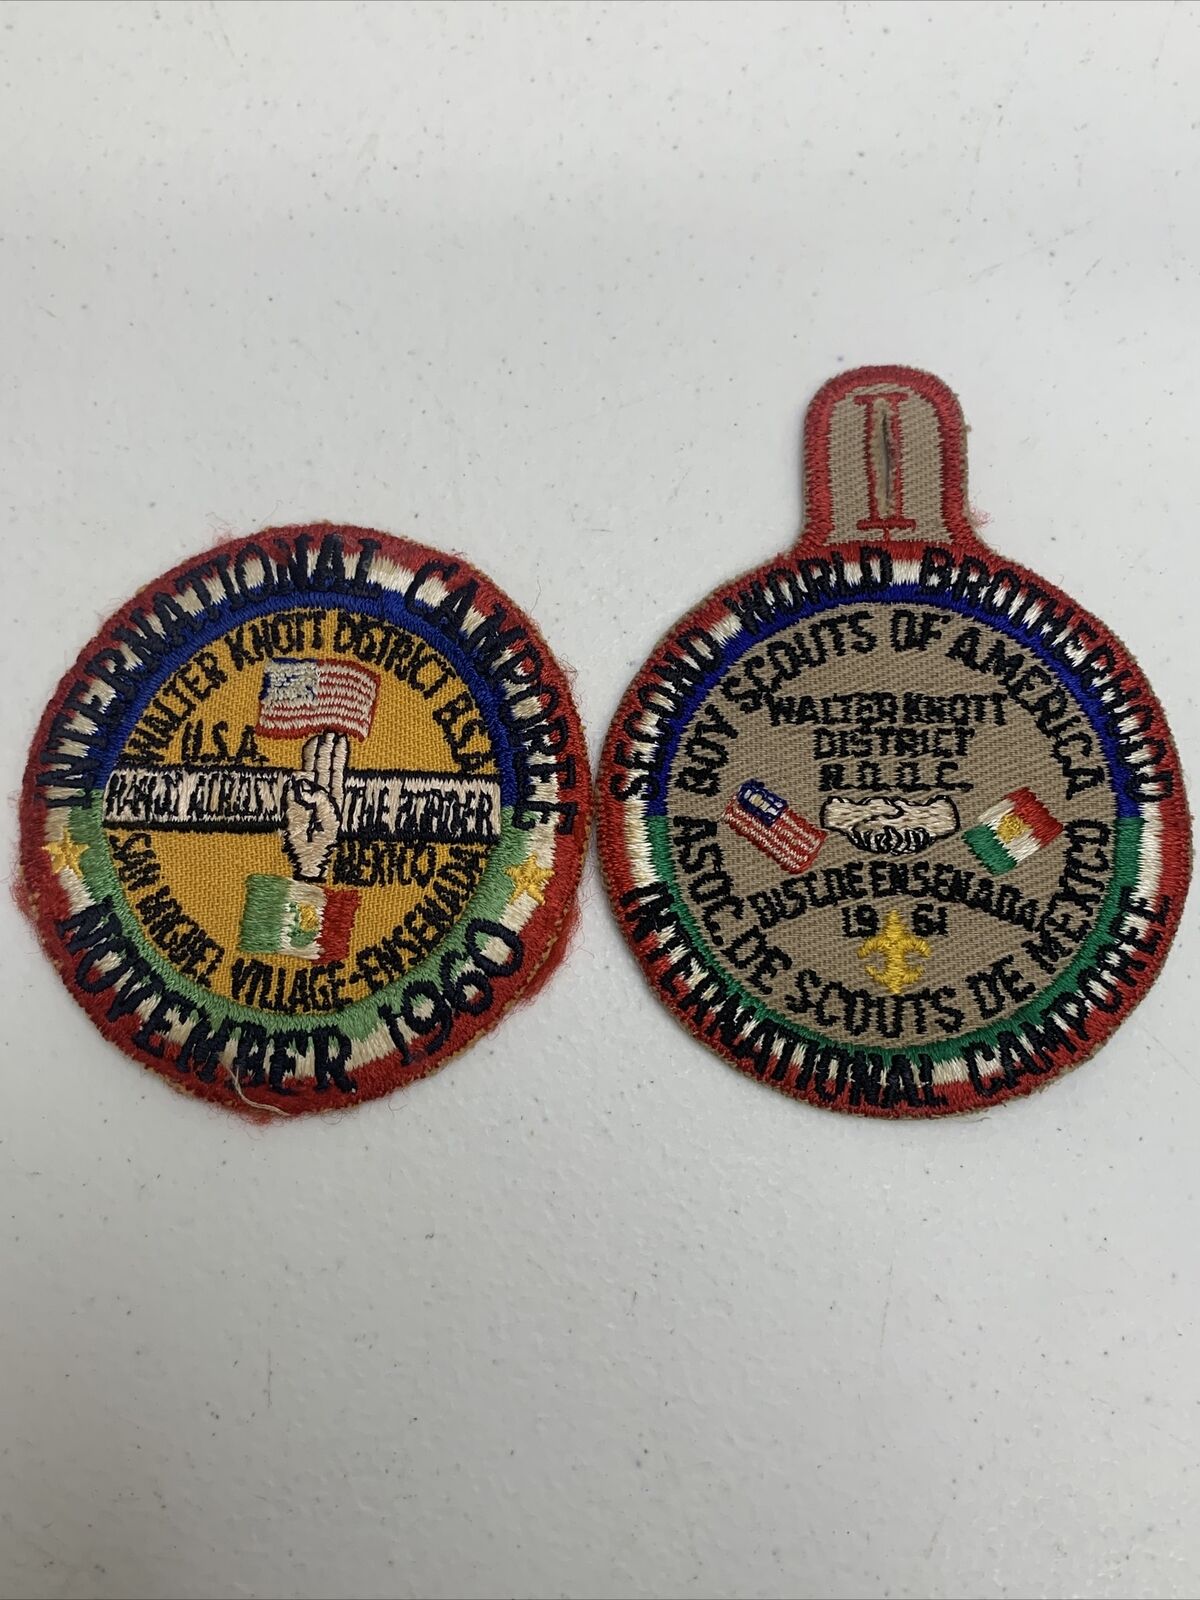 BSA International Camporee 1960 and 1961 Brotherhood Patches boy scouts